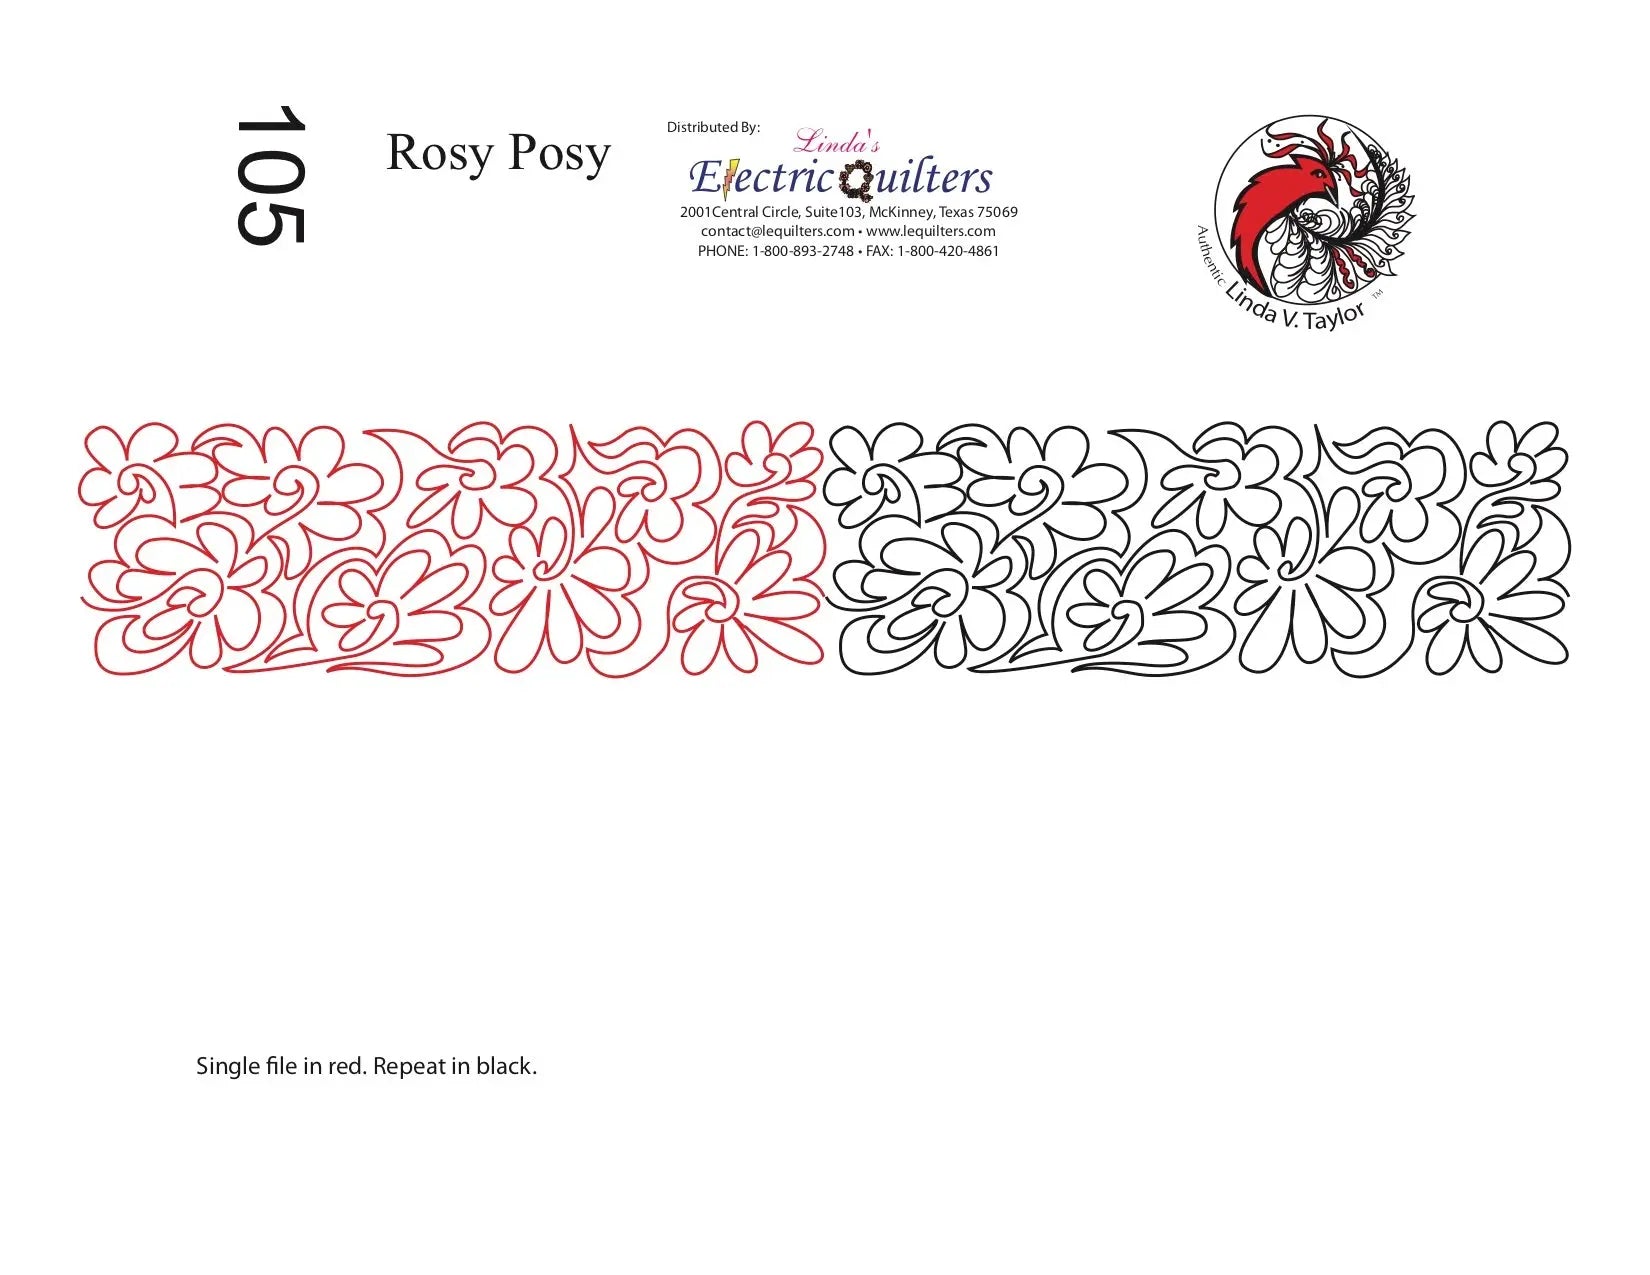 105 Rosy Posy Pantograph by Linda V. Taylor - Linda's Electric Quilters